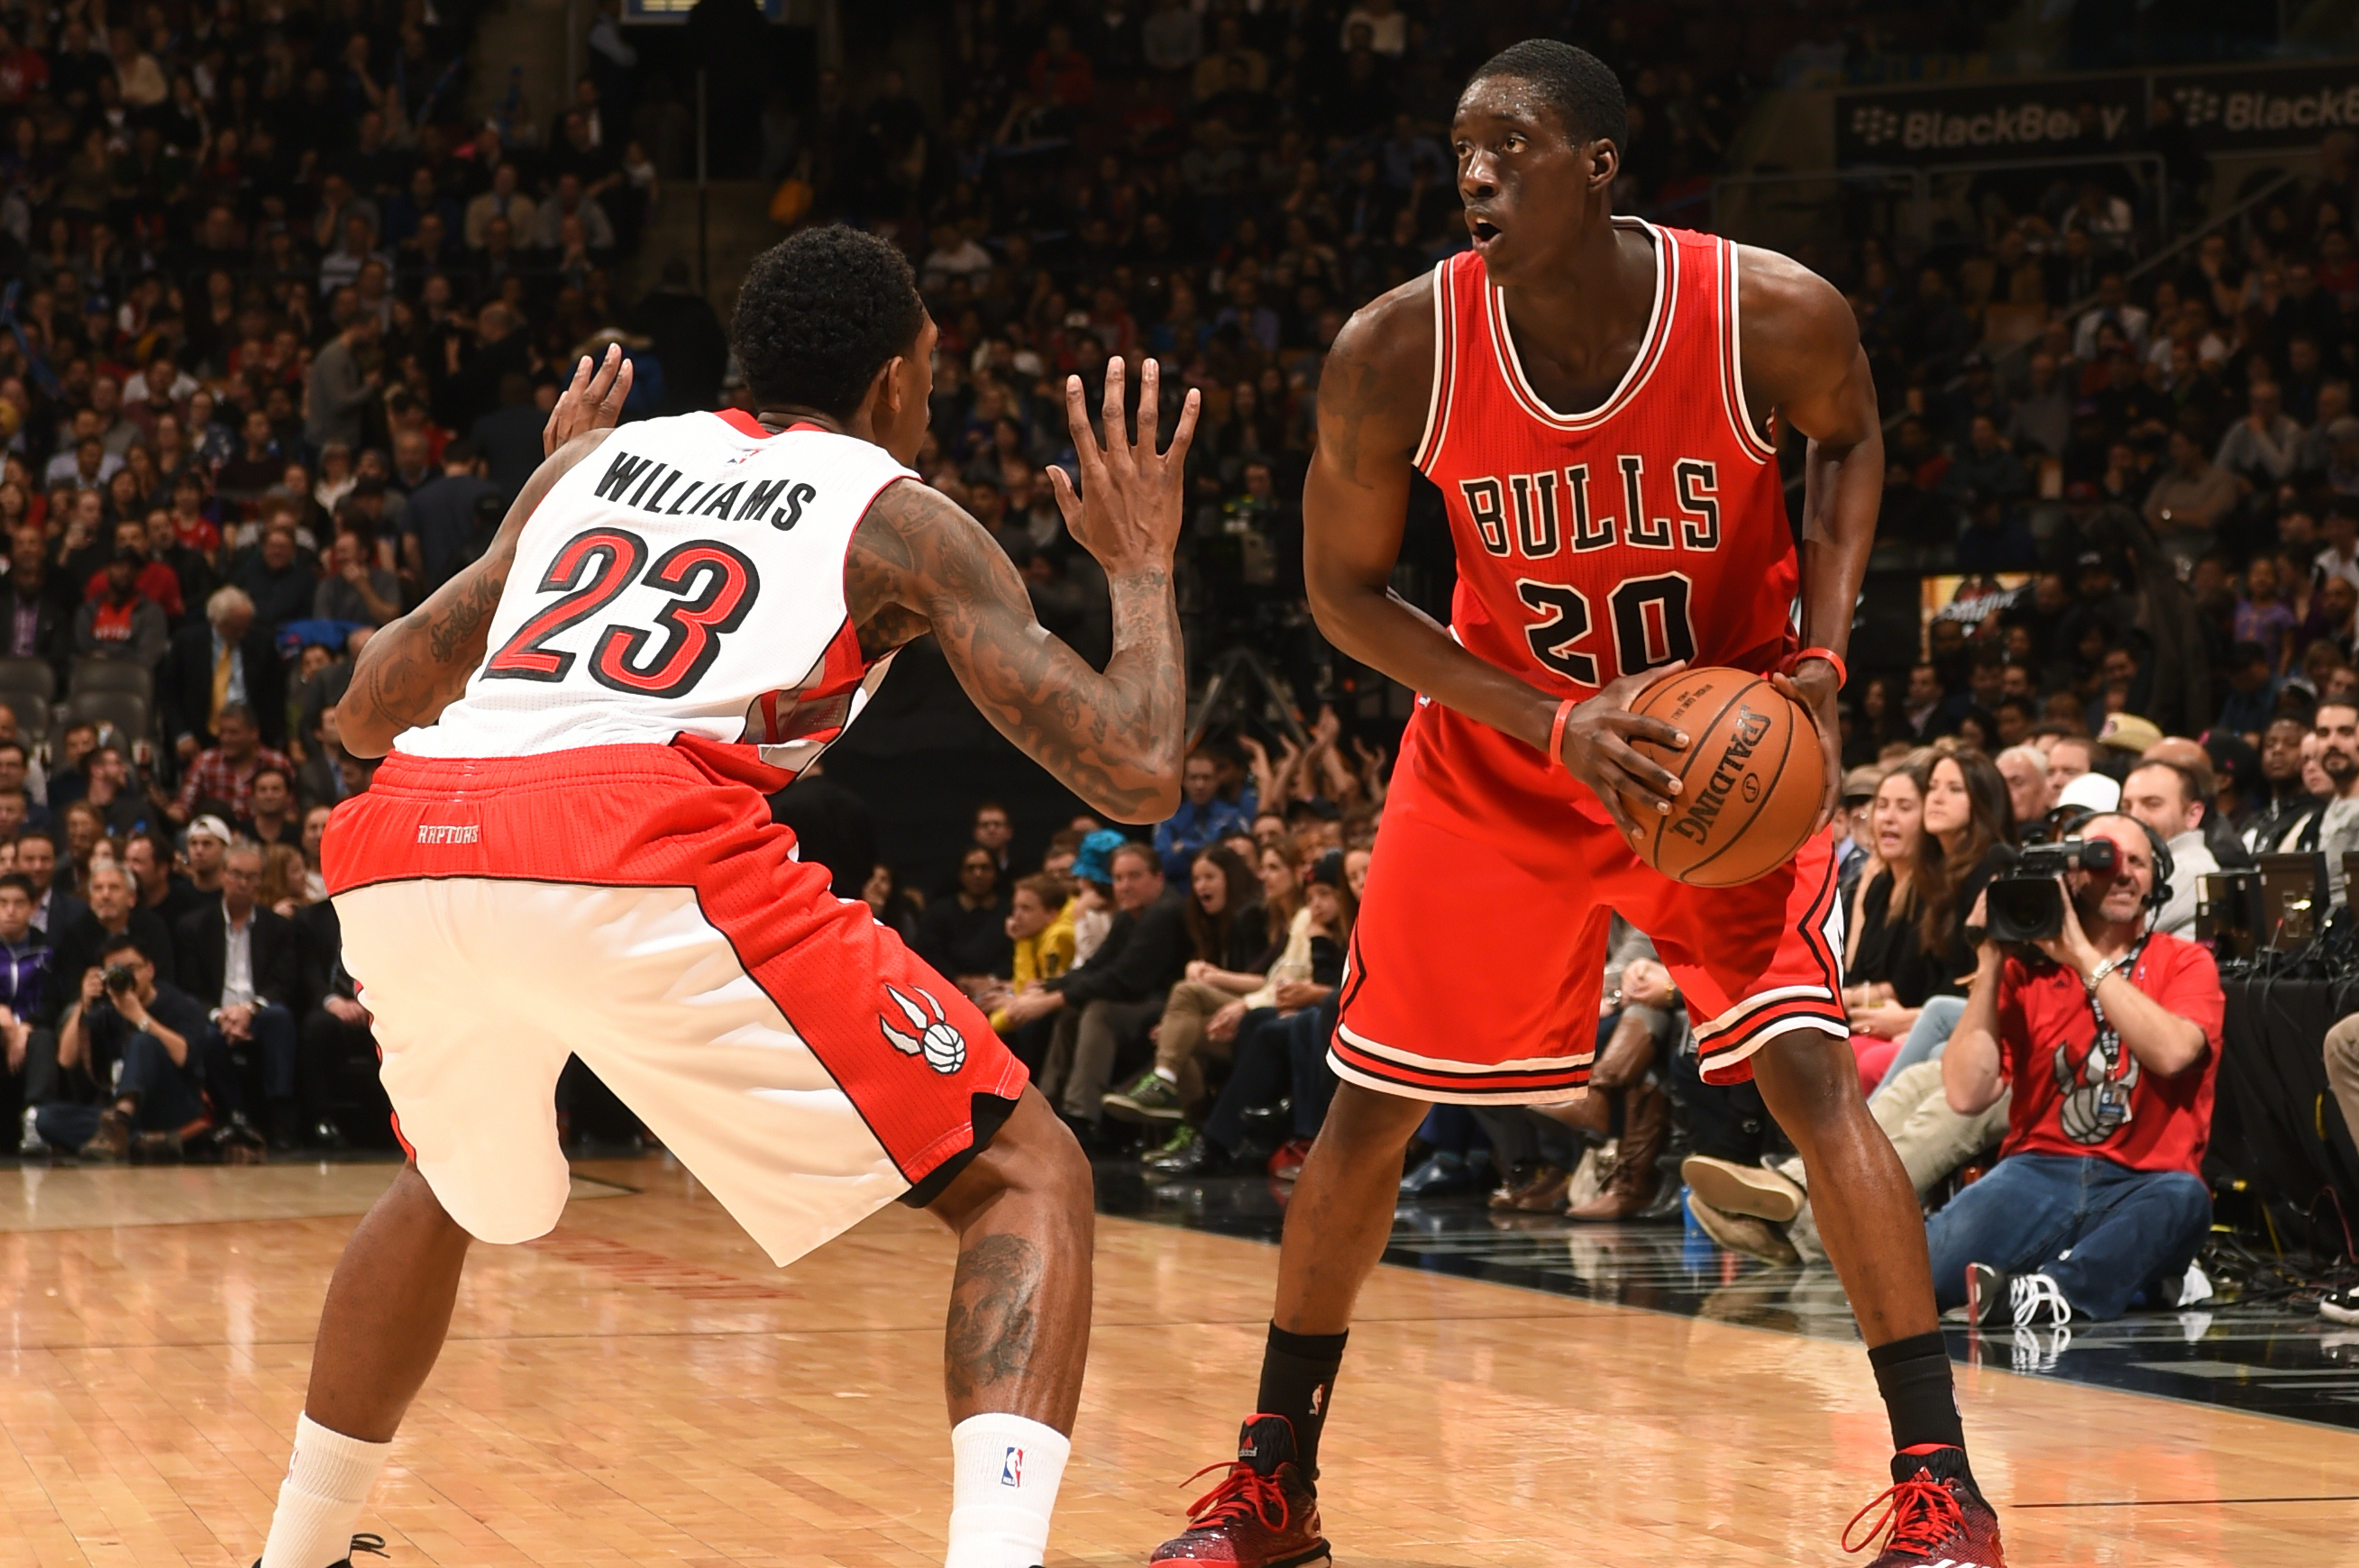 Tony Snell is the ugliest player in the NBA, Hands down